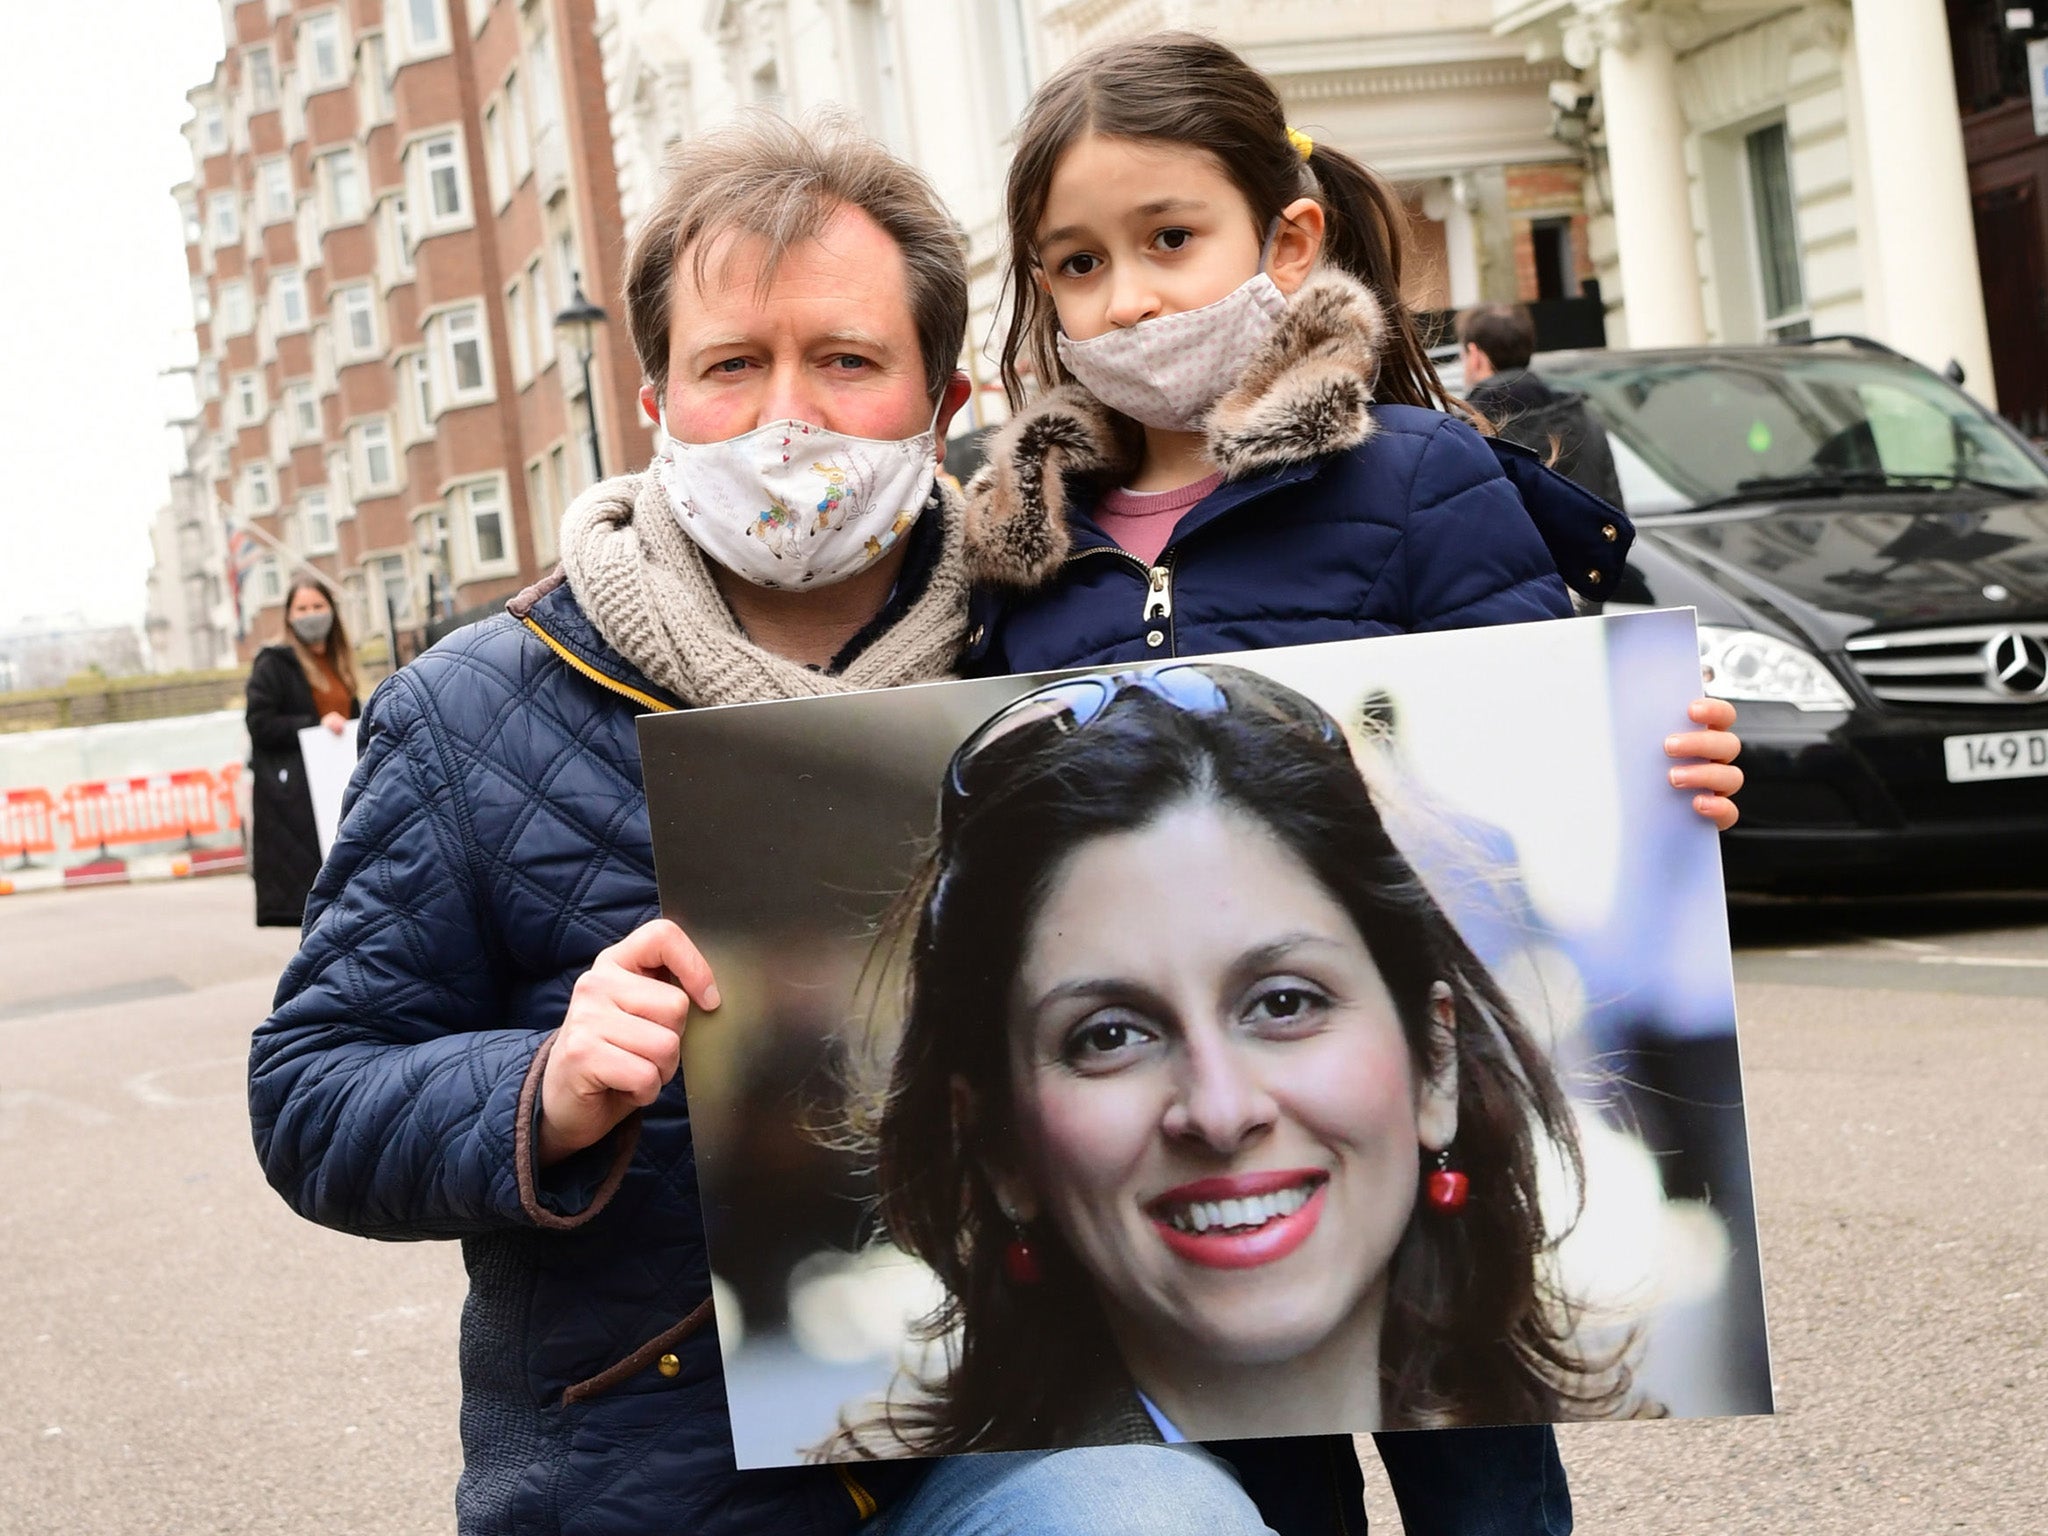 Richard Ratcliffe planned to deliver Amnesty petition to embassy